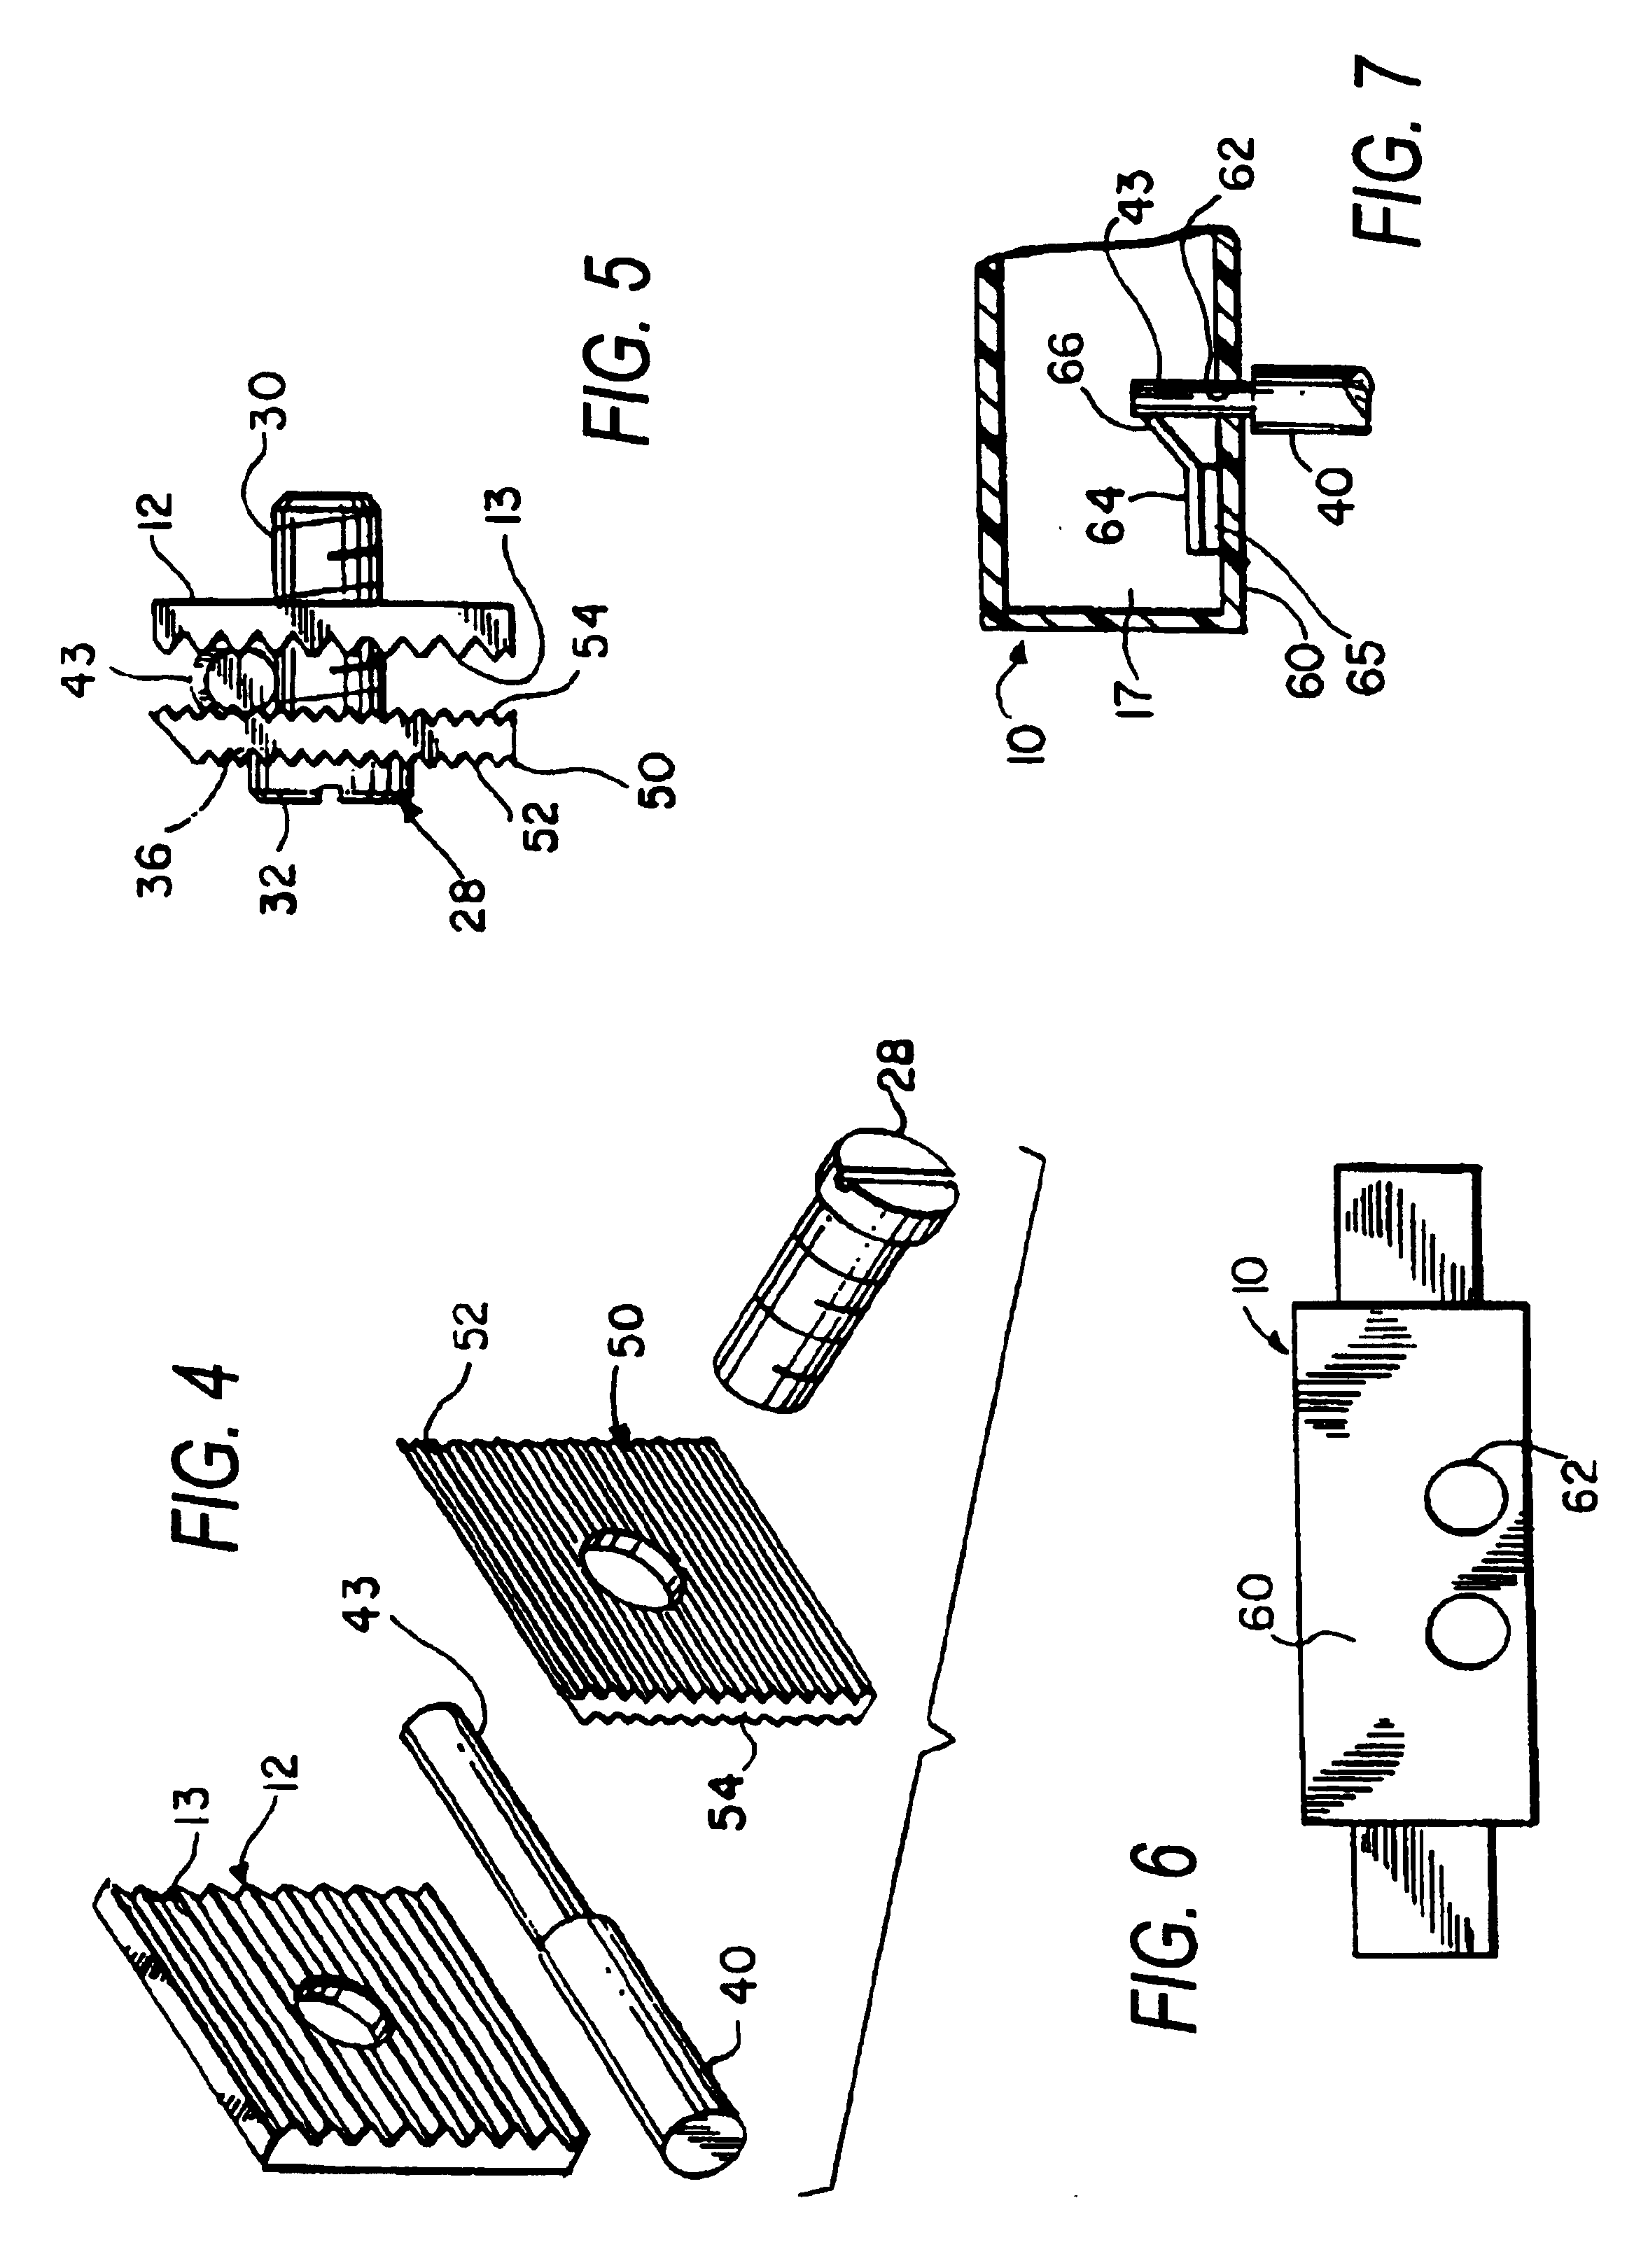 Electrical wiring device with multiple types of wire terminations